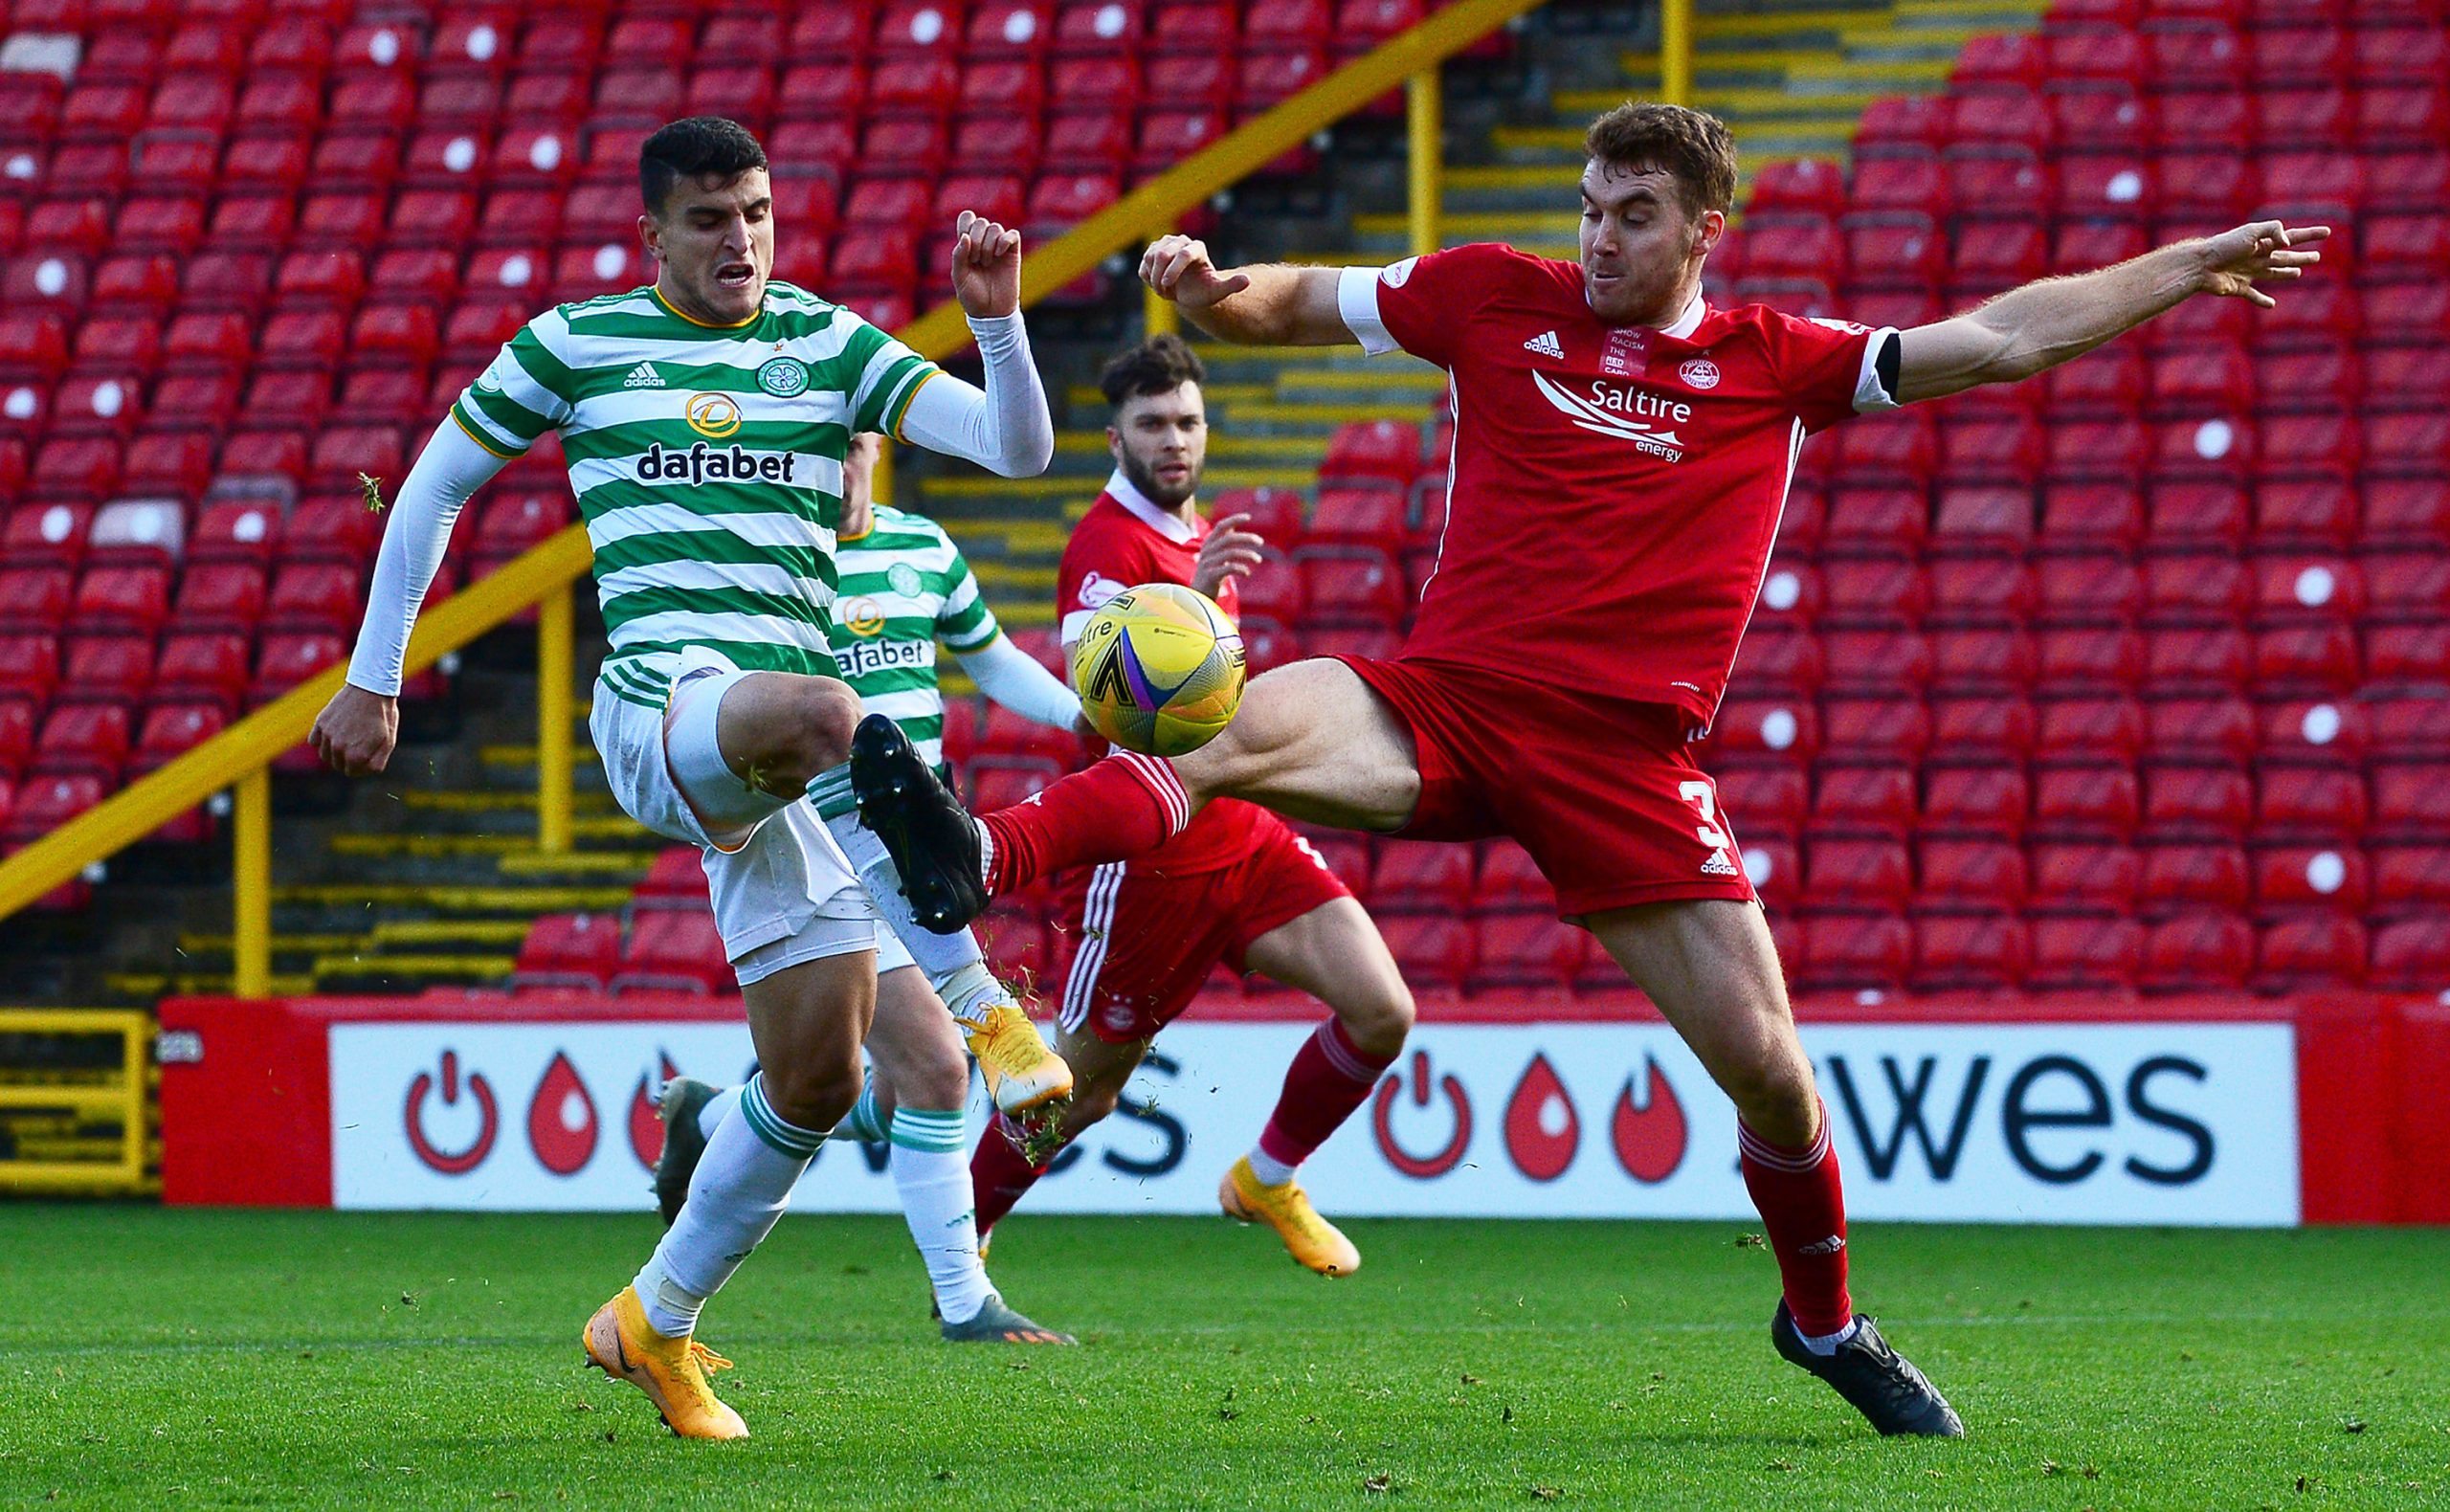 Celtic Vs Aberdeen Tactical Preview - Elyounoussi and Hoban